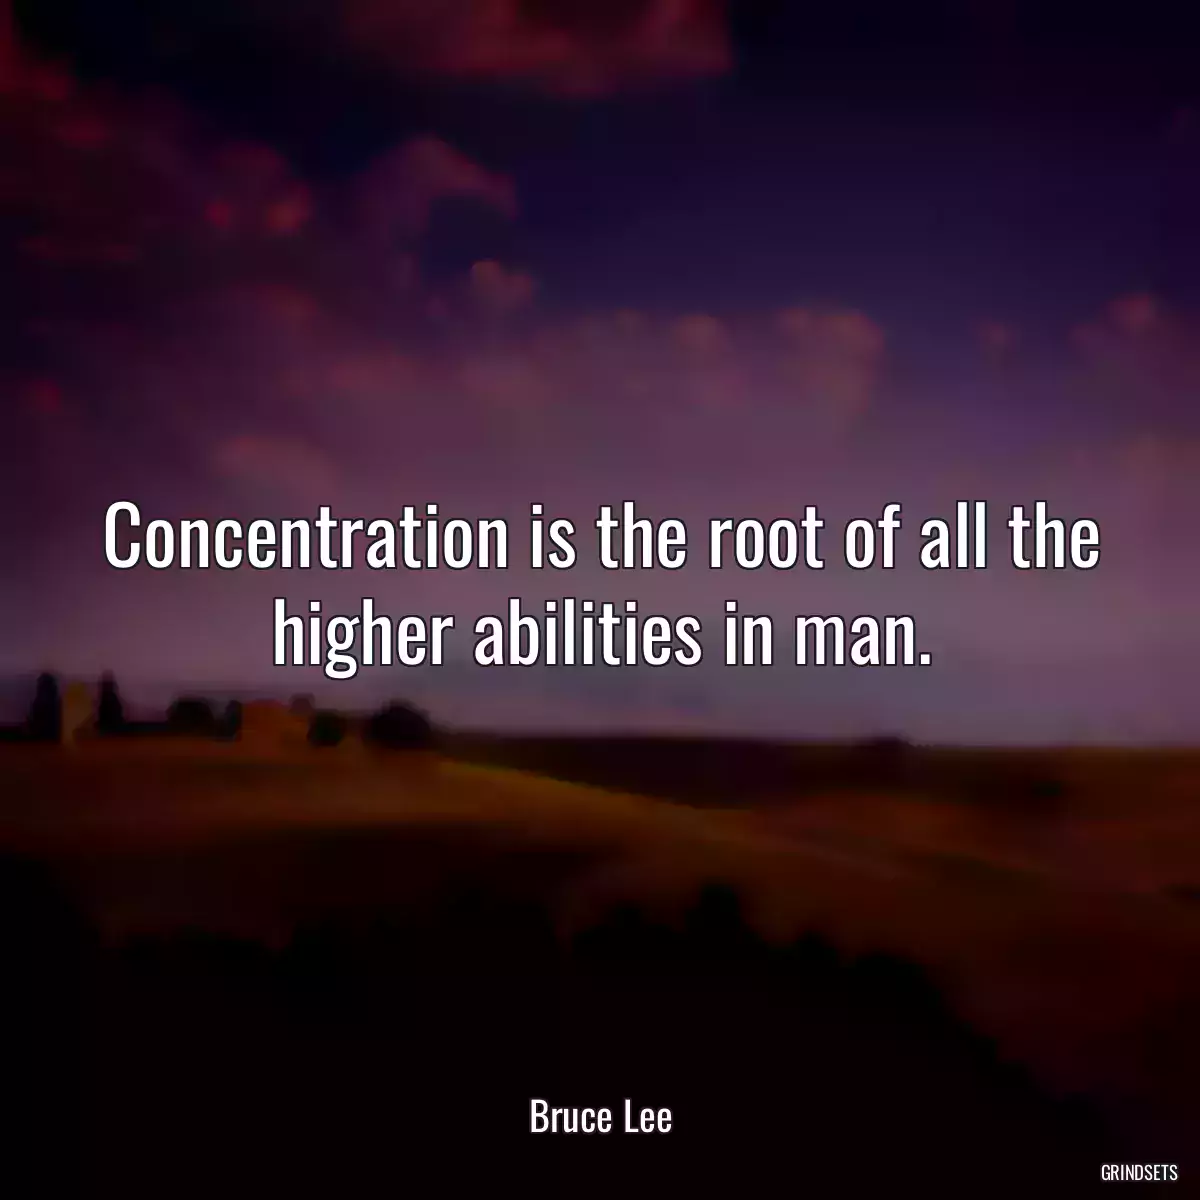 Concentration is the root of all the higher abilities in man.